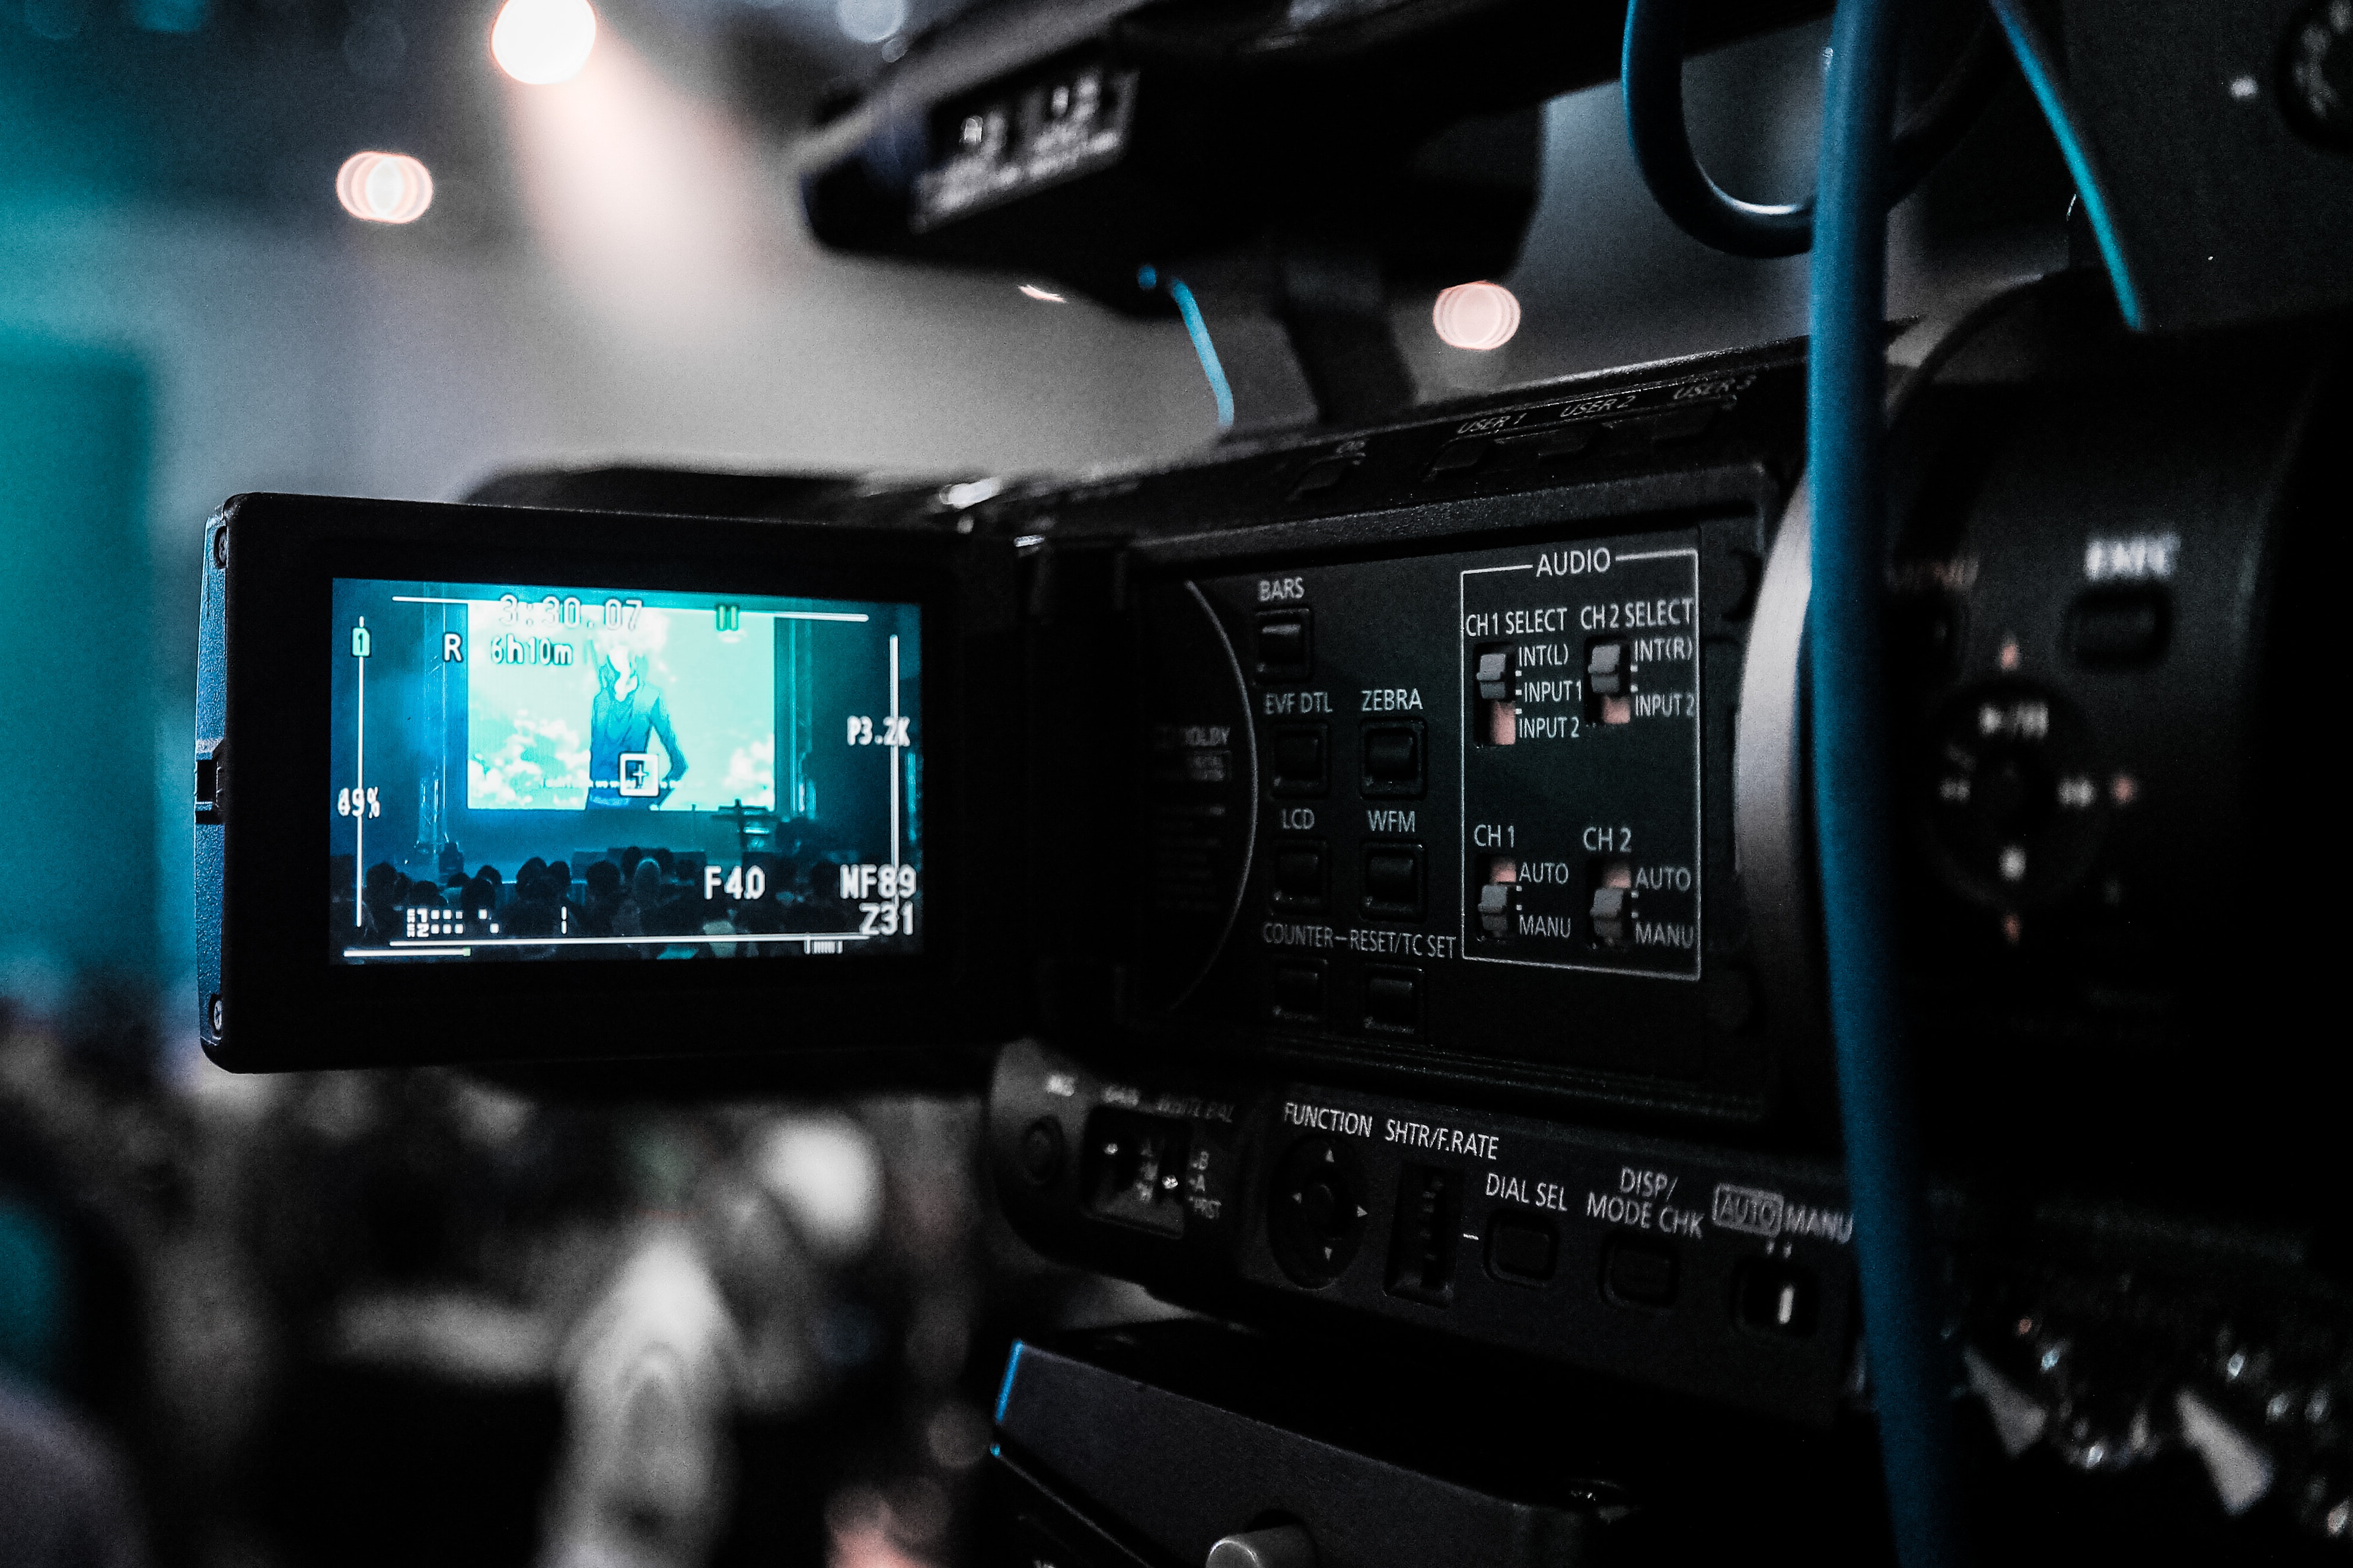 Three Reasons Video Marketing Is Important On Social Media In 2020